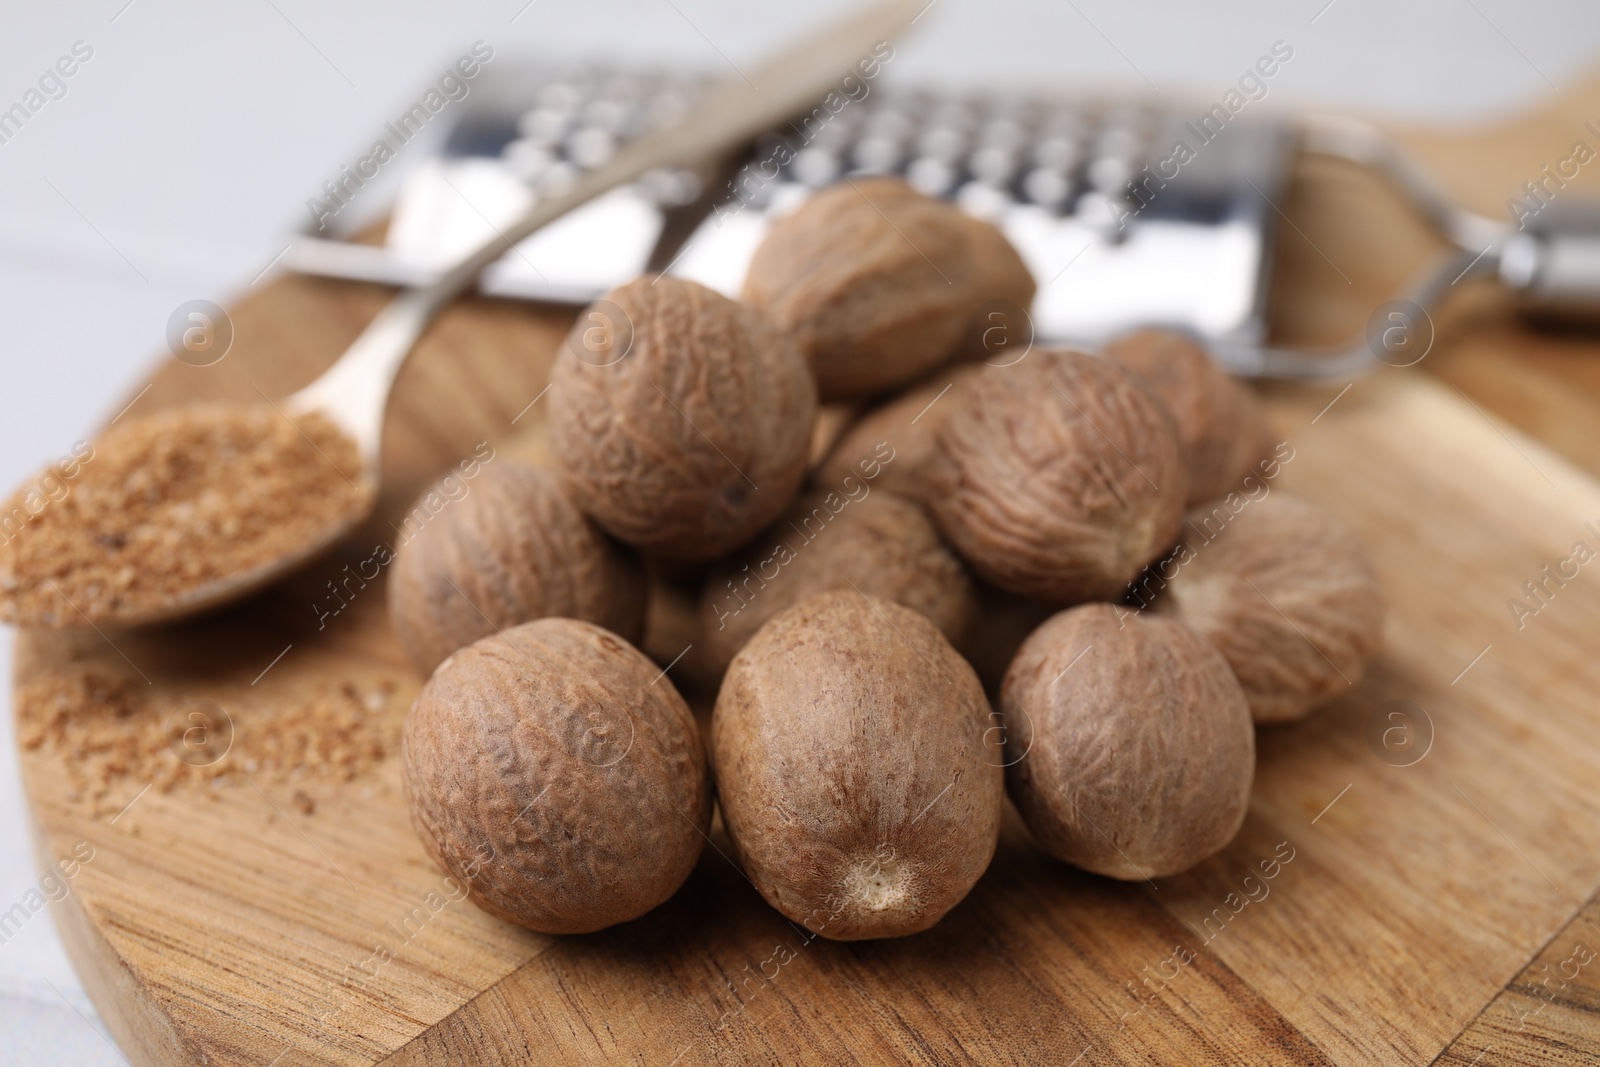 Photo of Heap of nutmegs on wooden board, closeup